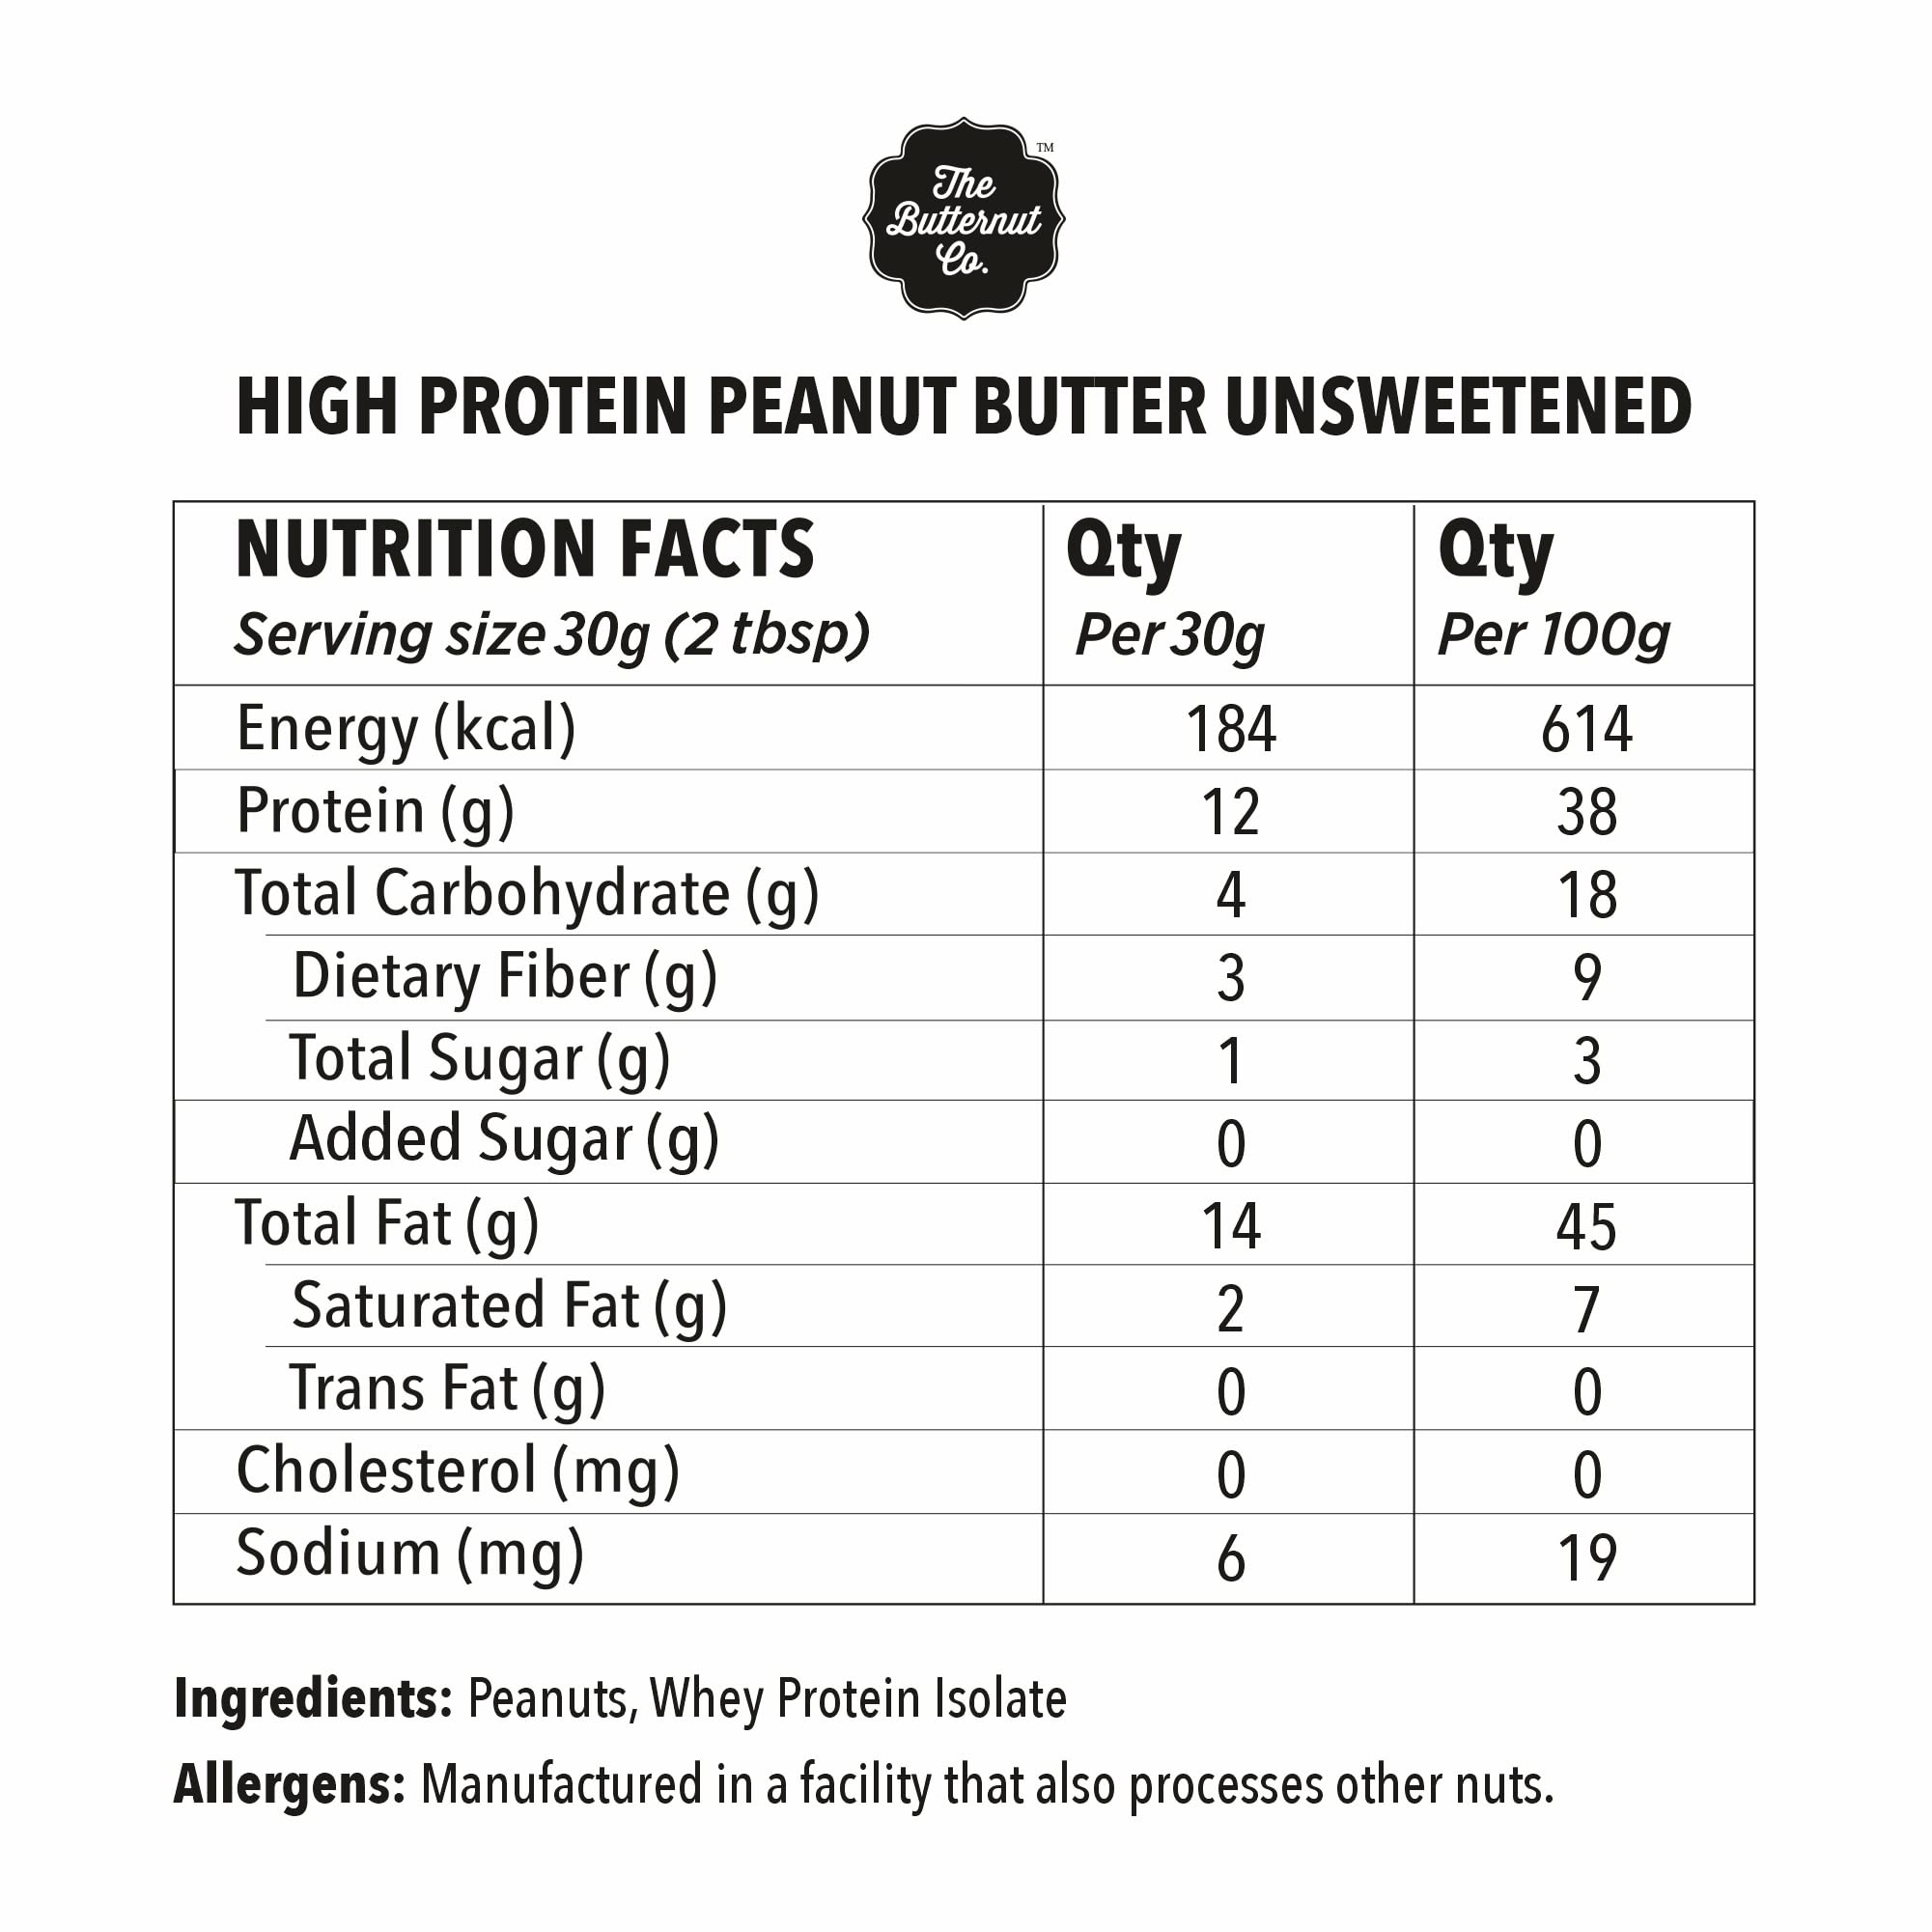 The Butternut Co. Protein Peanut Butter Unsweetened, Creamy 925 Gm (38G Protein, No Added Sugar, Whey Protein Isolate)